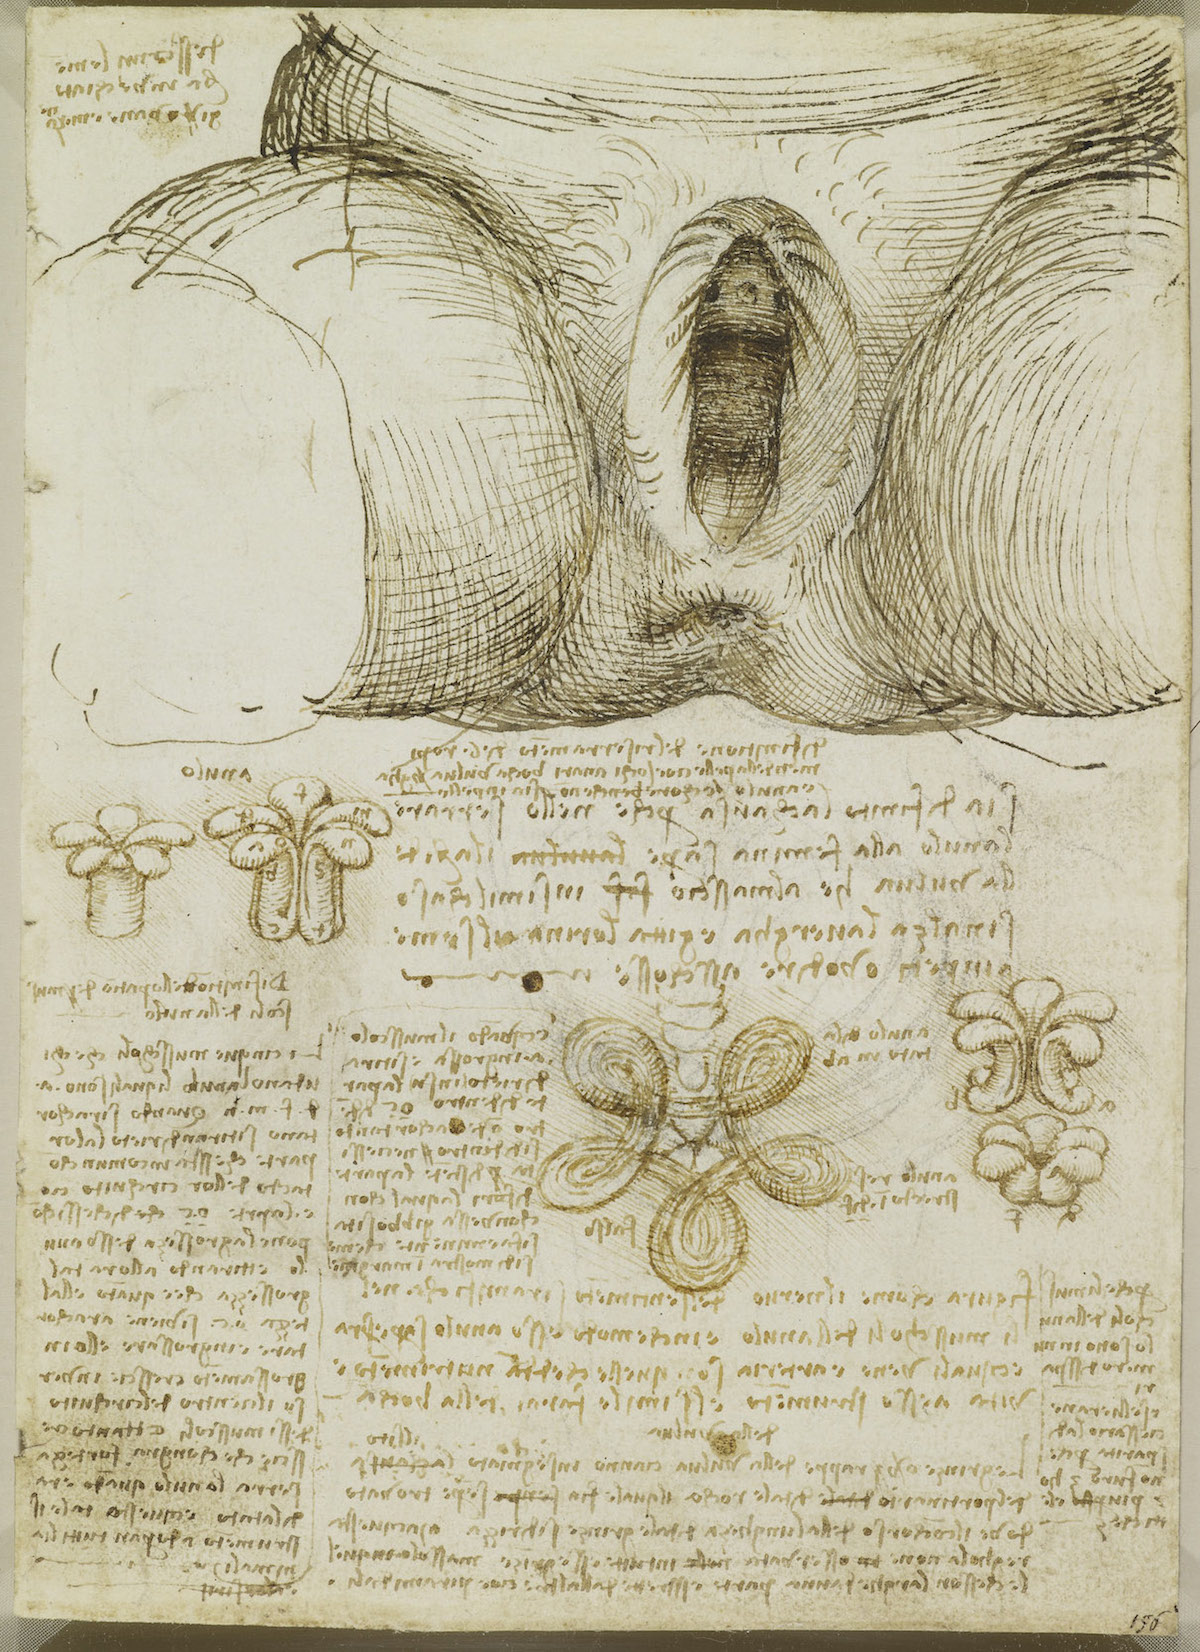 The male and female reproductive systems c.1508